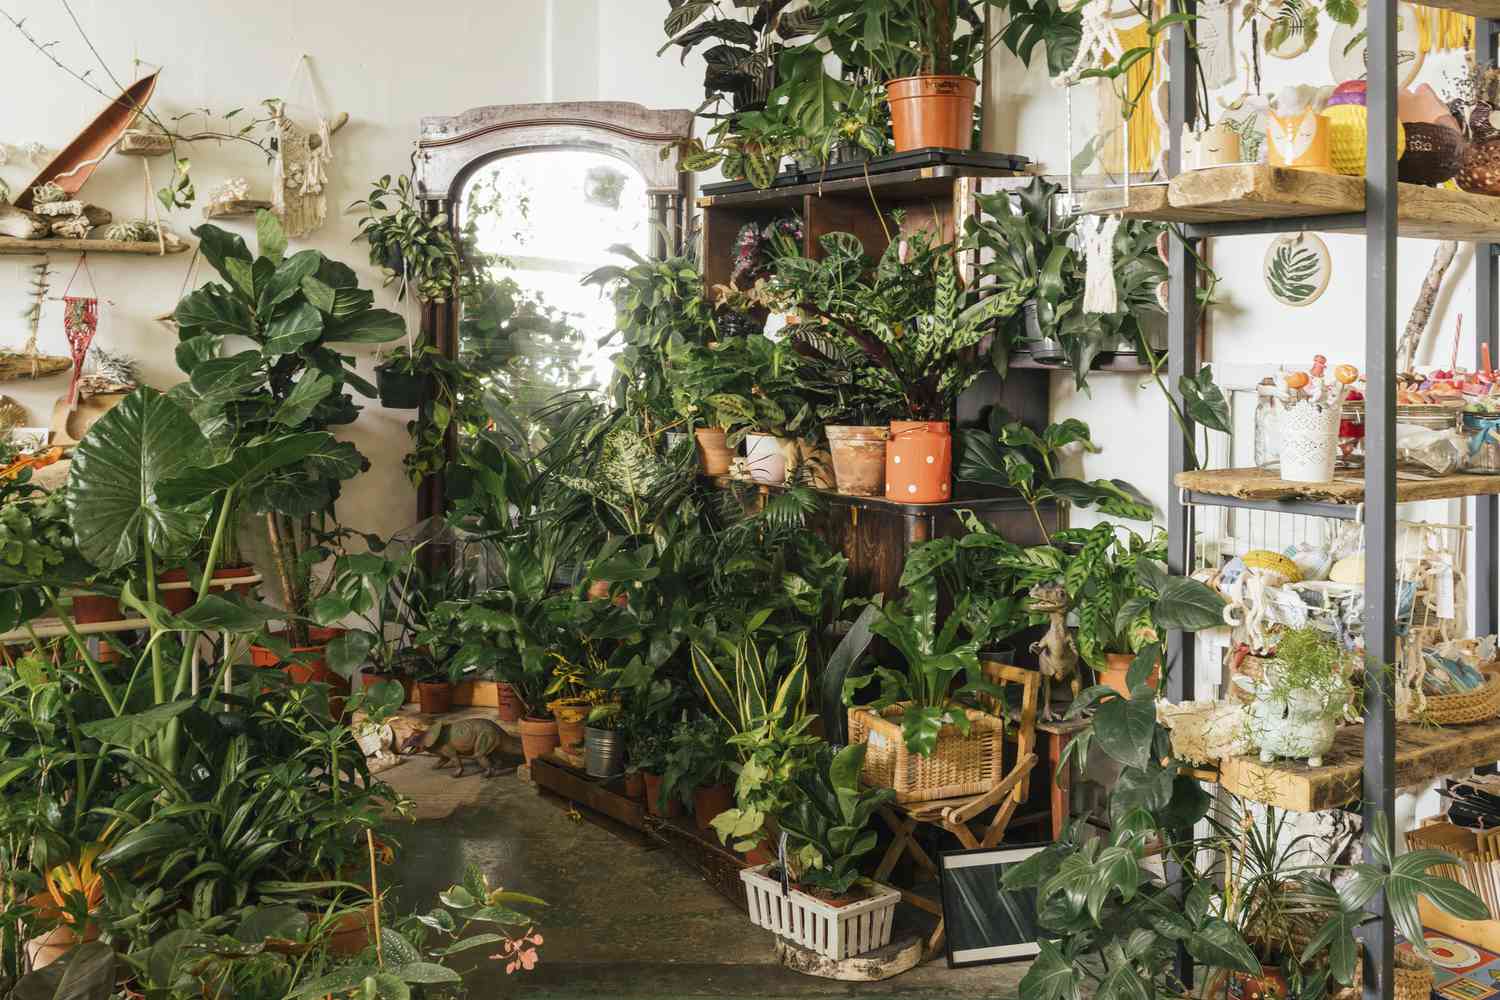 Room filled with lots of houseplants